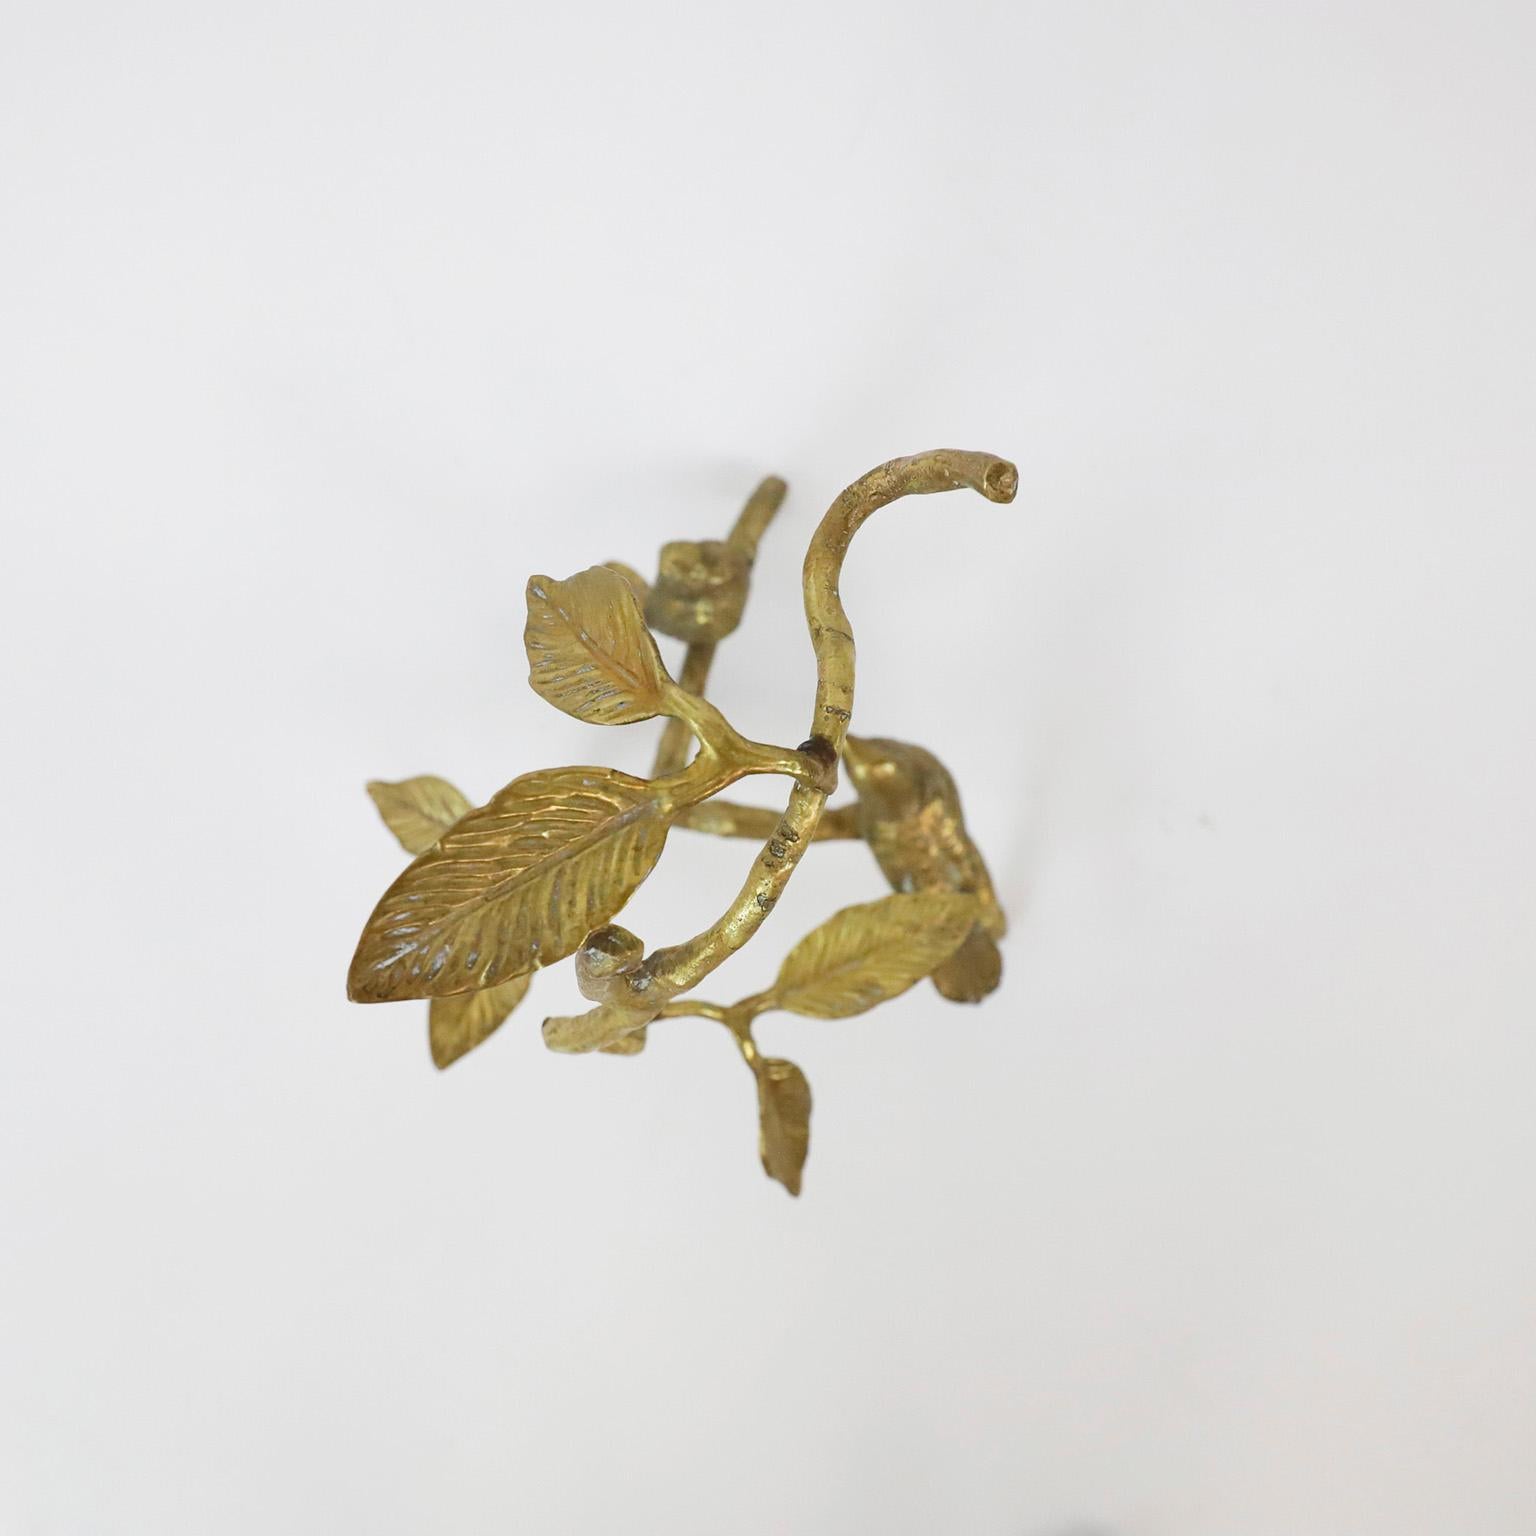 Circa 1970. We offer this brass sculpture in a Manner of Diego Giacometti.